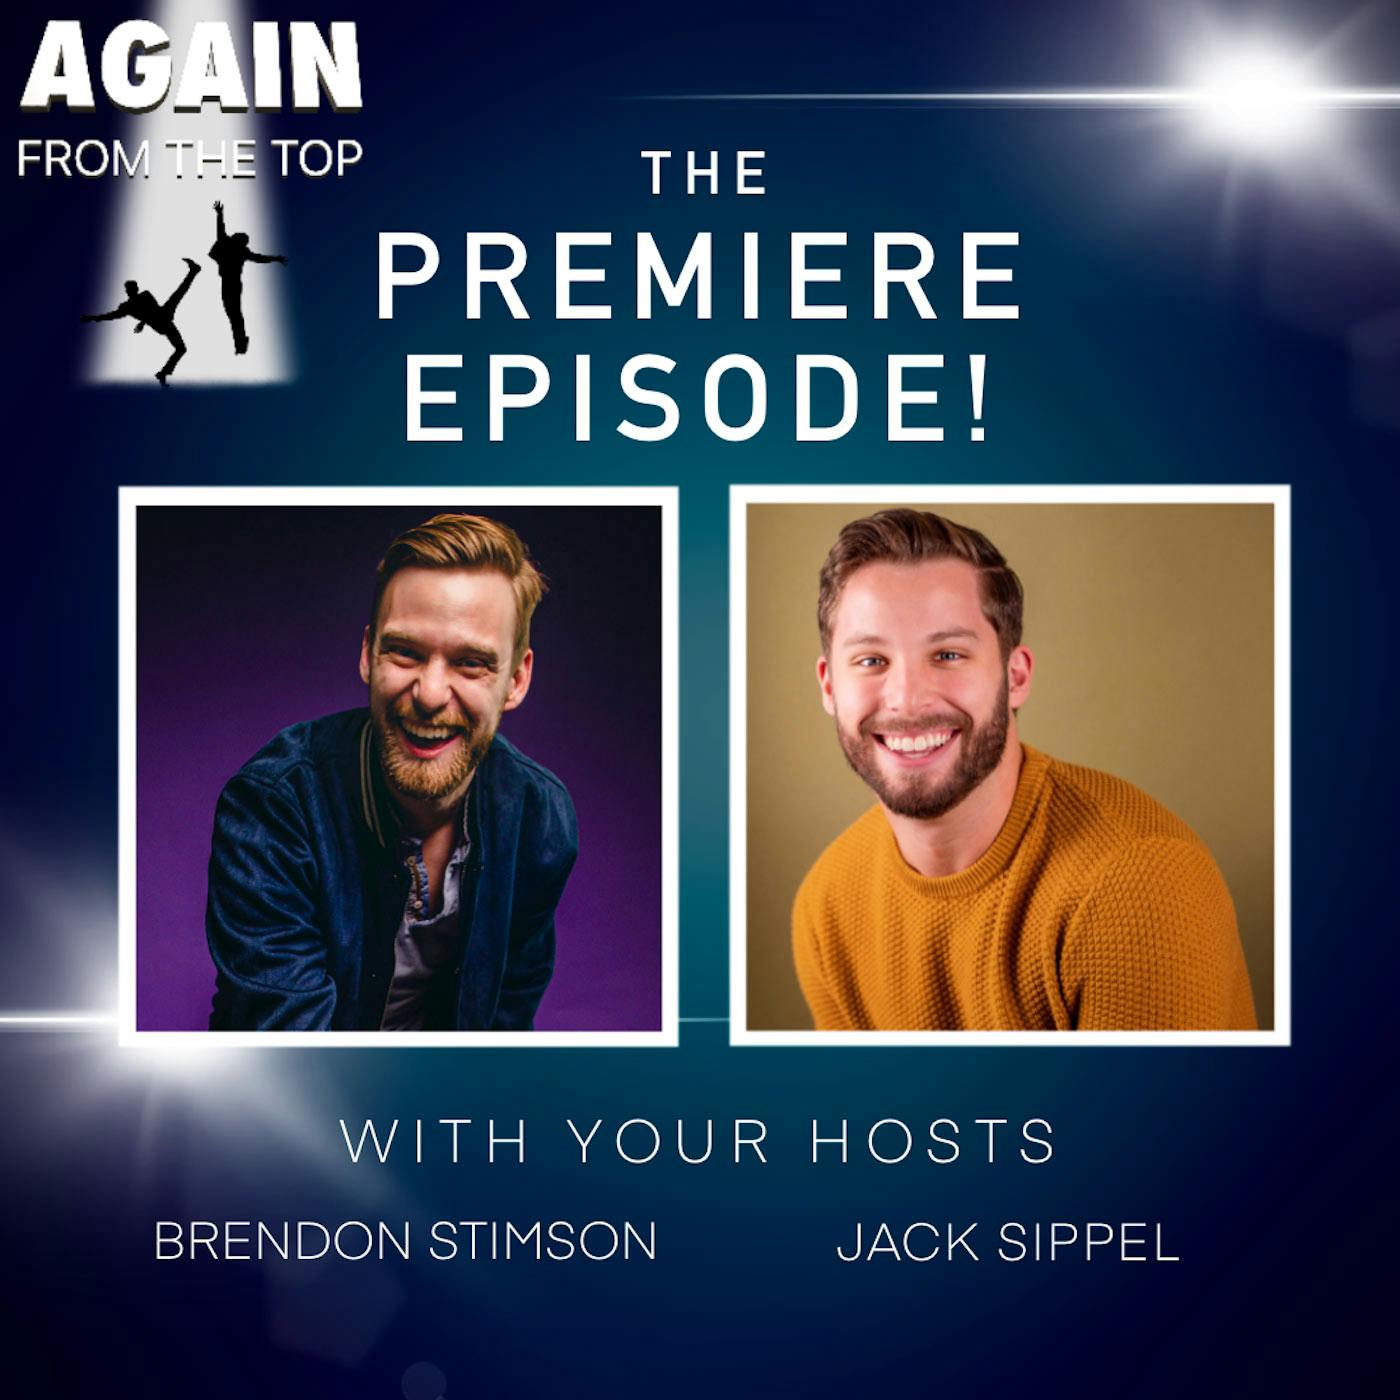 S1/Ep1: GET OUT YOUR TAP SHOES, FRANCIS! BRENDON AND JACK ARE DOING A SHOW!